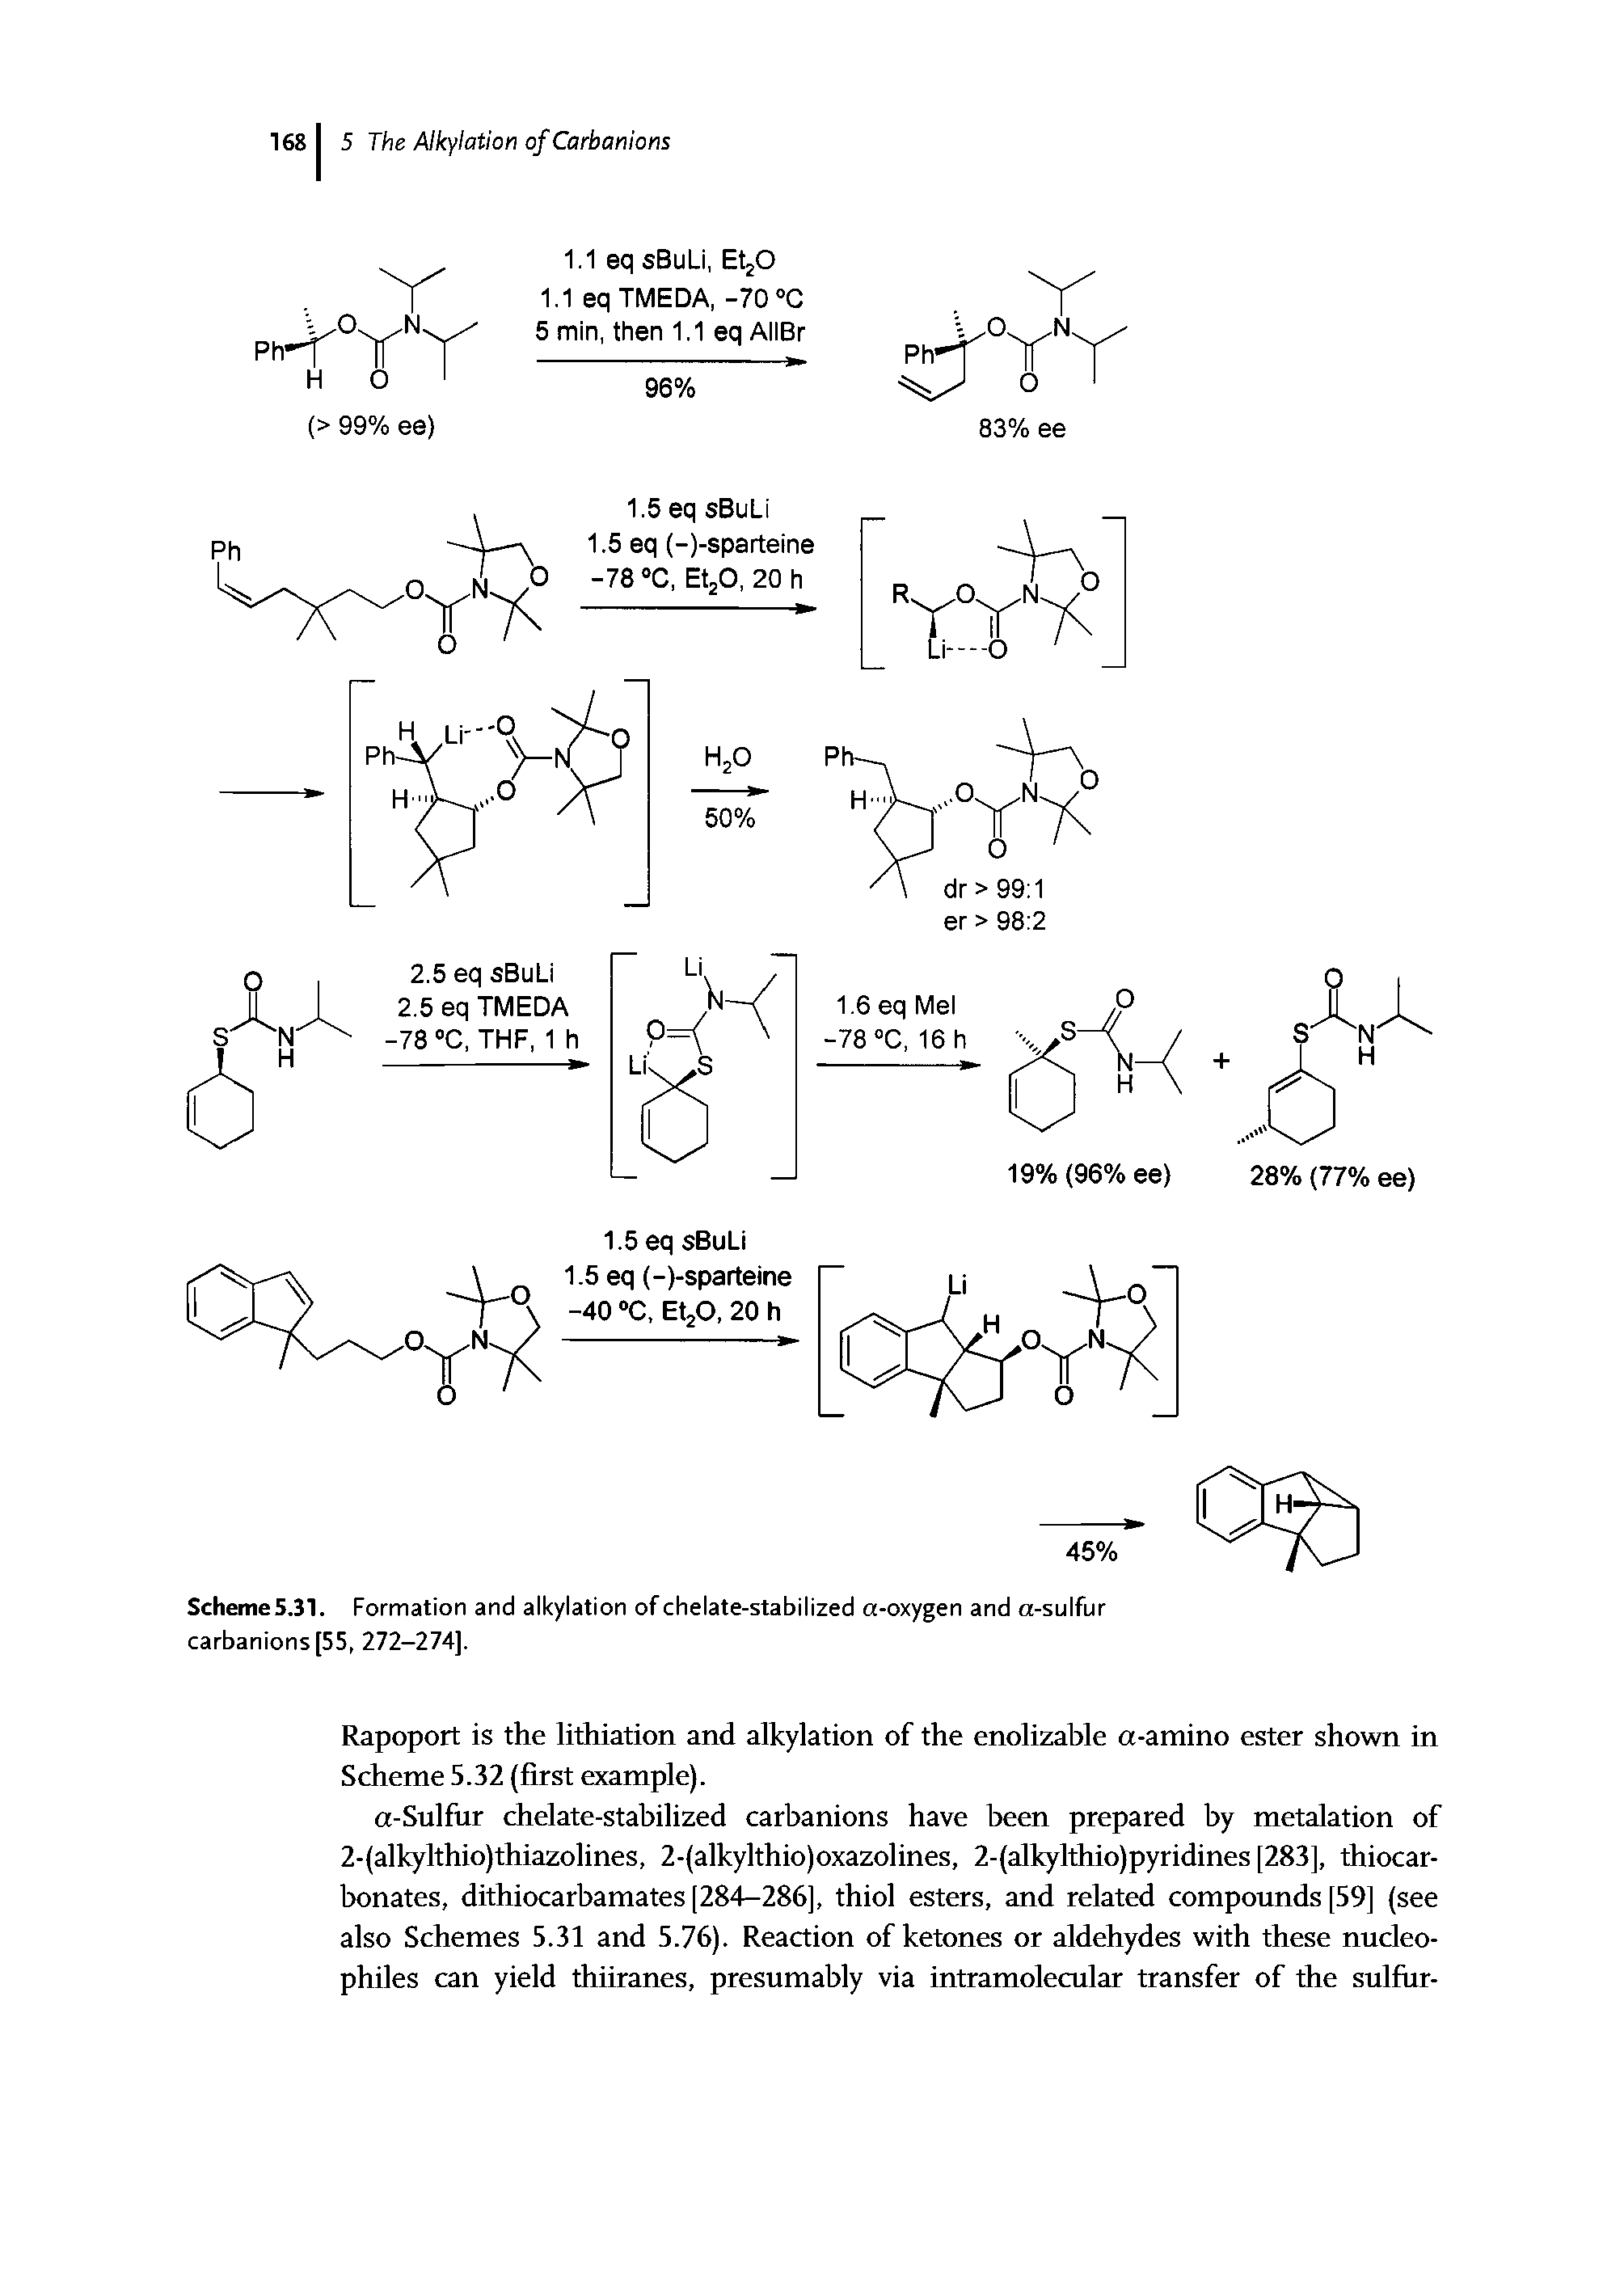 Scheme 5.31. Formation and alkylation of chelate-stabilized a-oxygen and a-sulfur carbanions [55, 272-274].